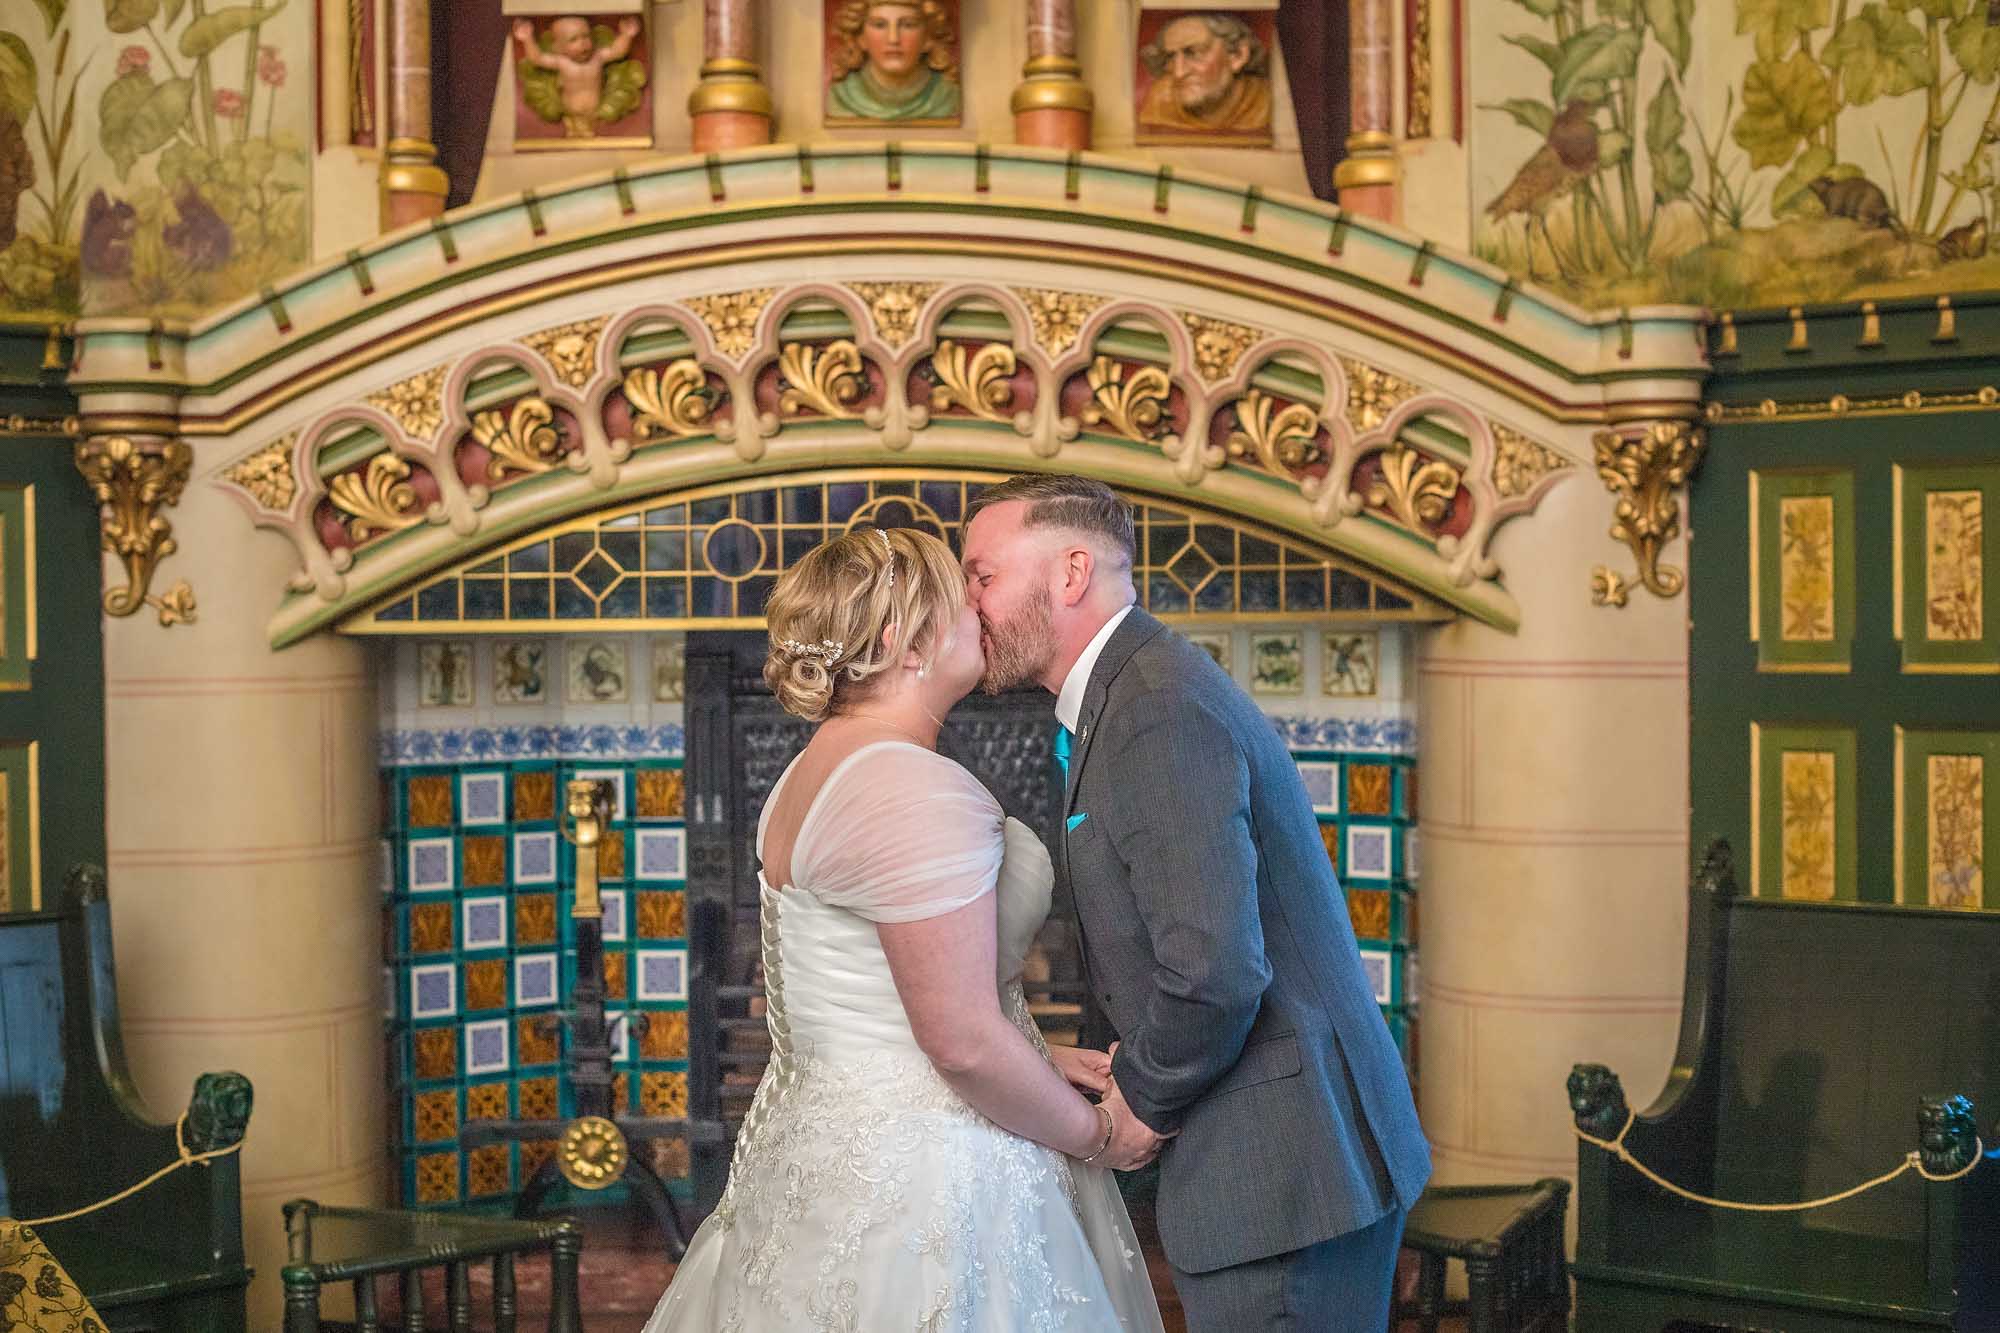 The newly-weds have their first kiss in Castell Coch's Drawing Room